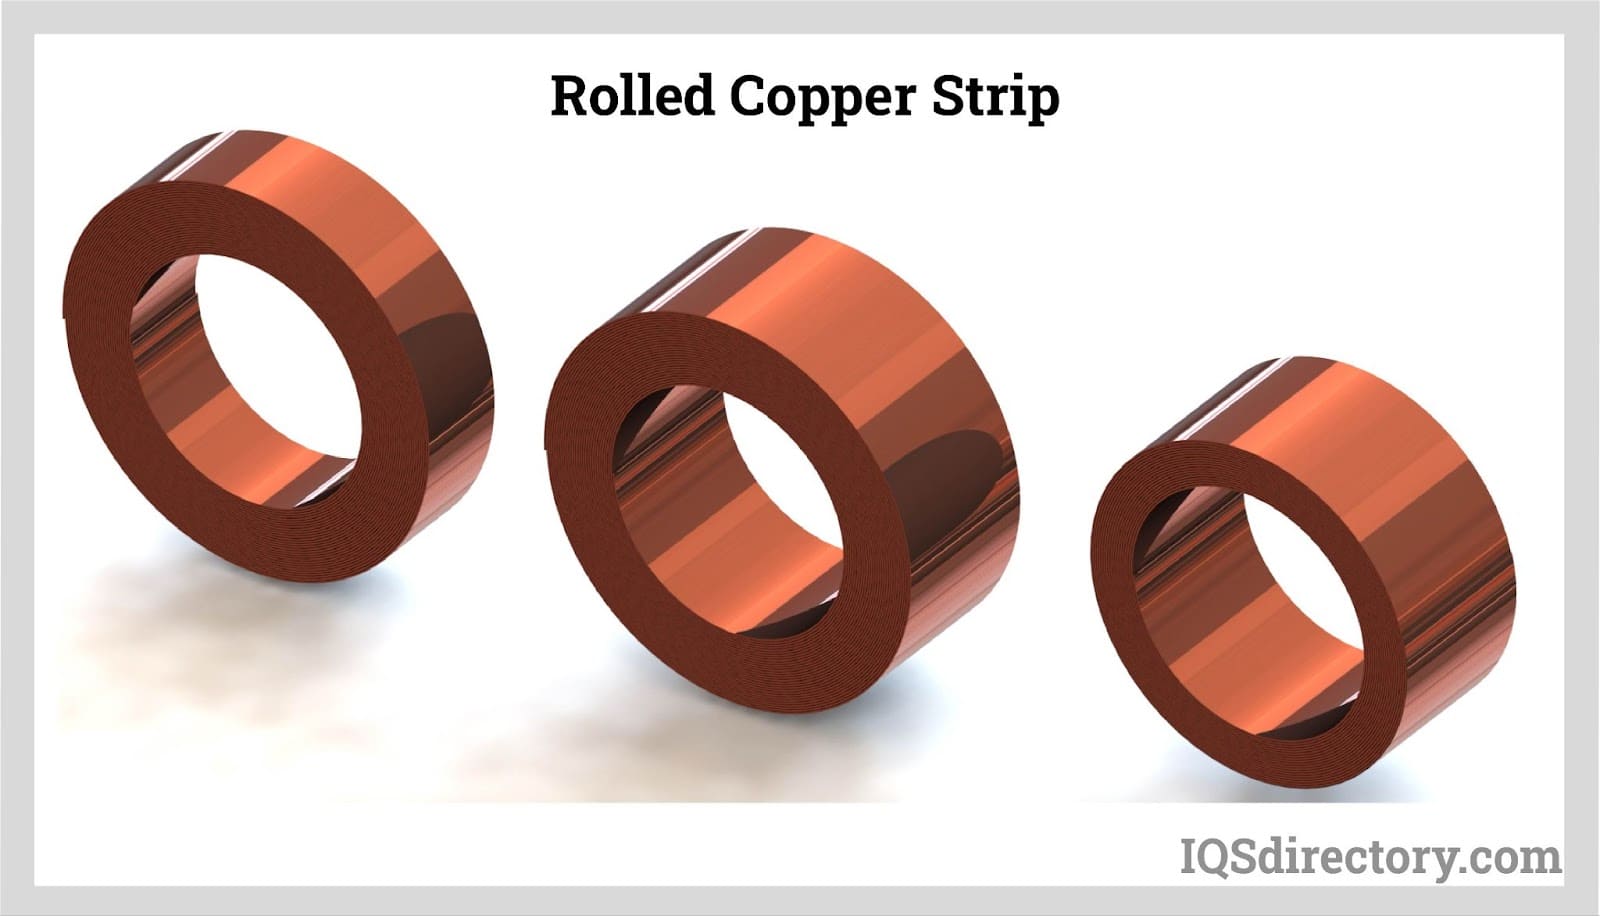 Copper: Definition, Composition, Types, Properties, and Applications